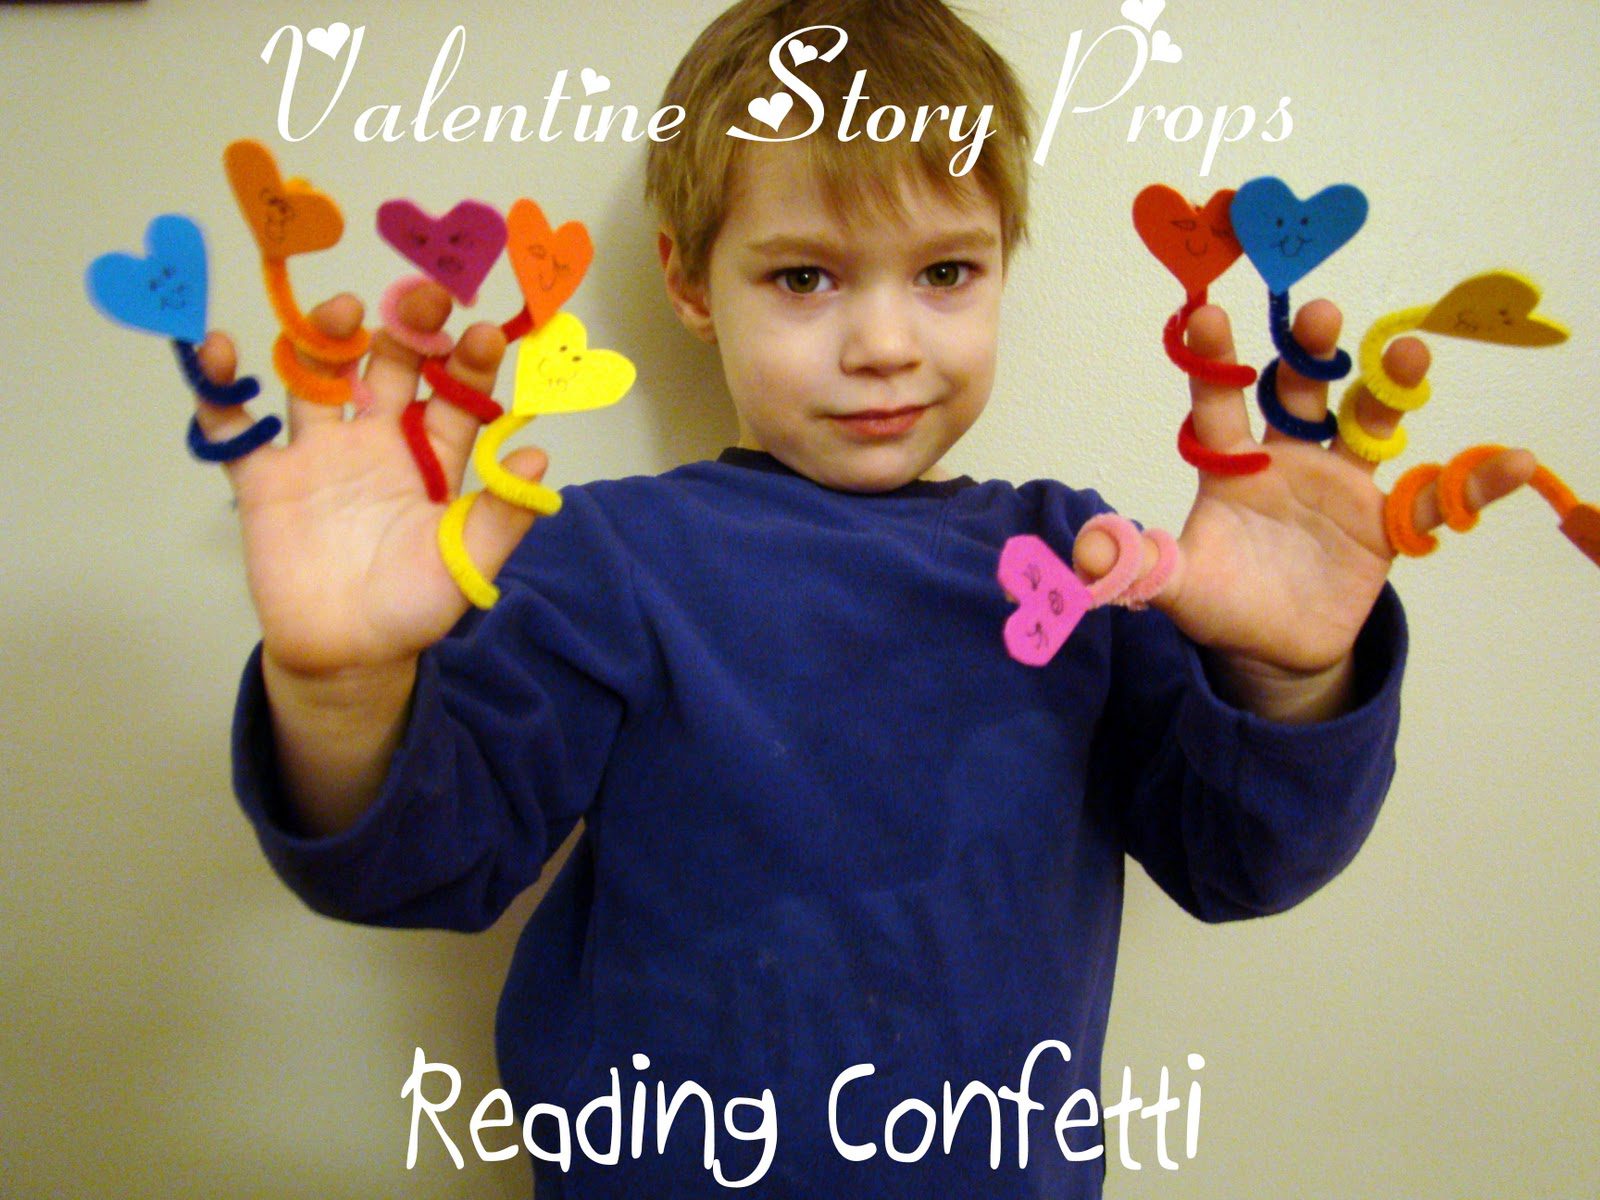 A little boy is shown with "puppets" on his fingers that are made from twisted pipe cleaners and foam hearts with faces drawn on them.